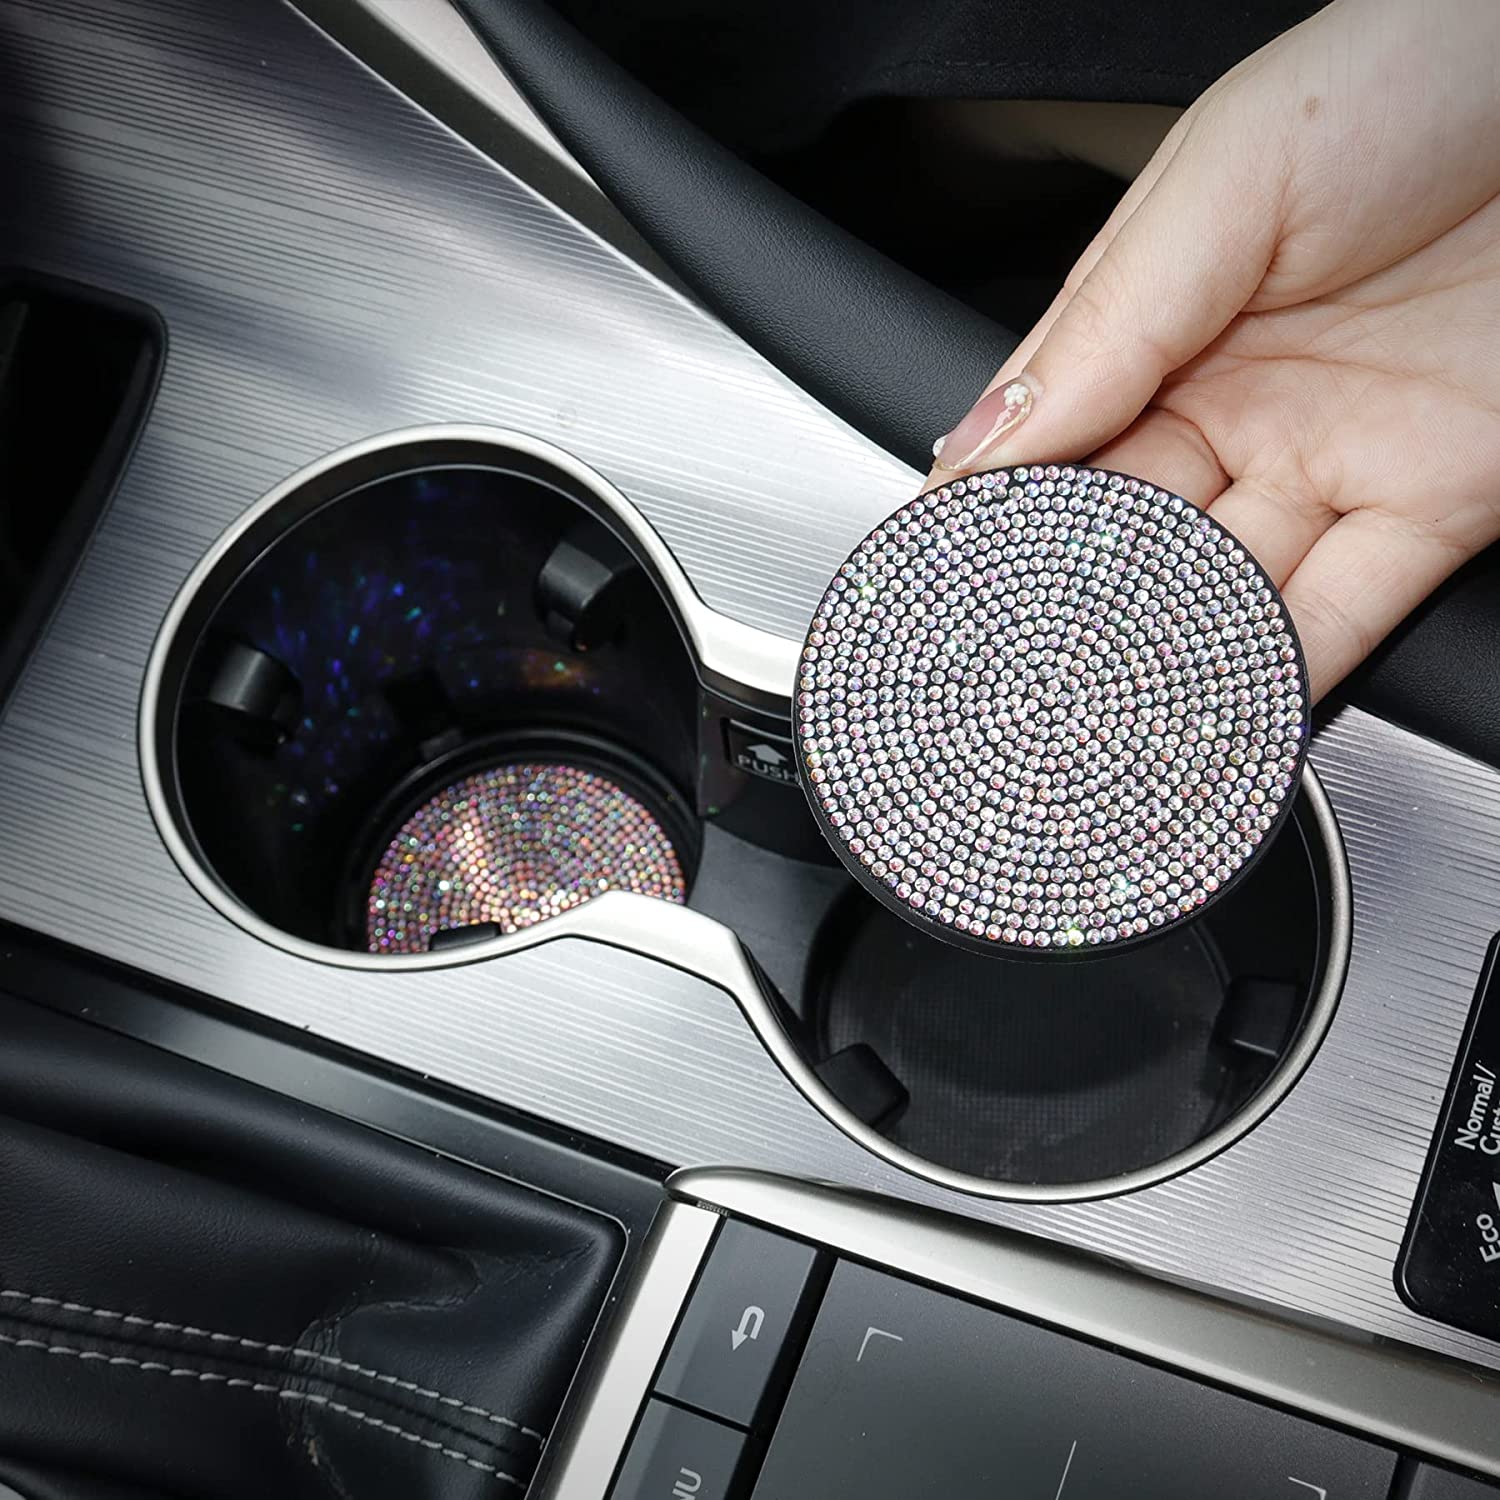 Bling Cup Holder Coasters for Car, 4PCS Universal Non-Slip Cup Holder, Embedded Decorative Coasters, Shiny Crystal Car Interior Accessories Gifts for Women